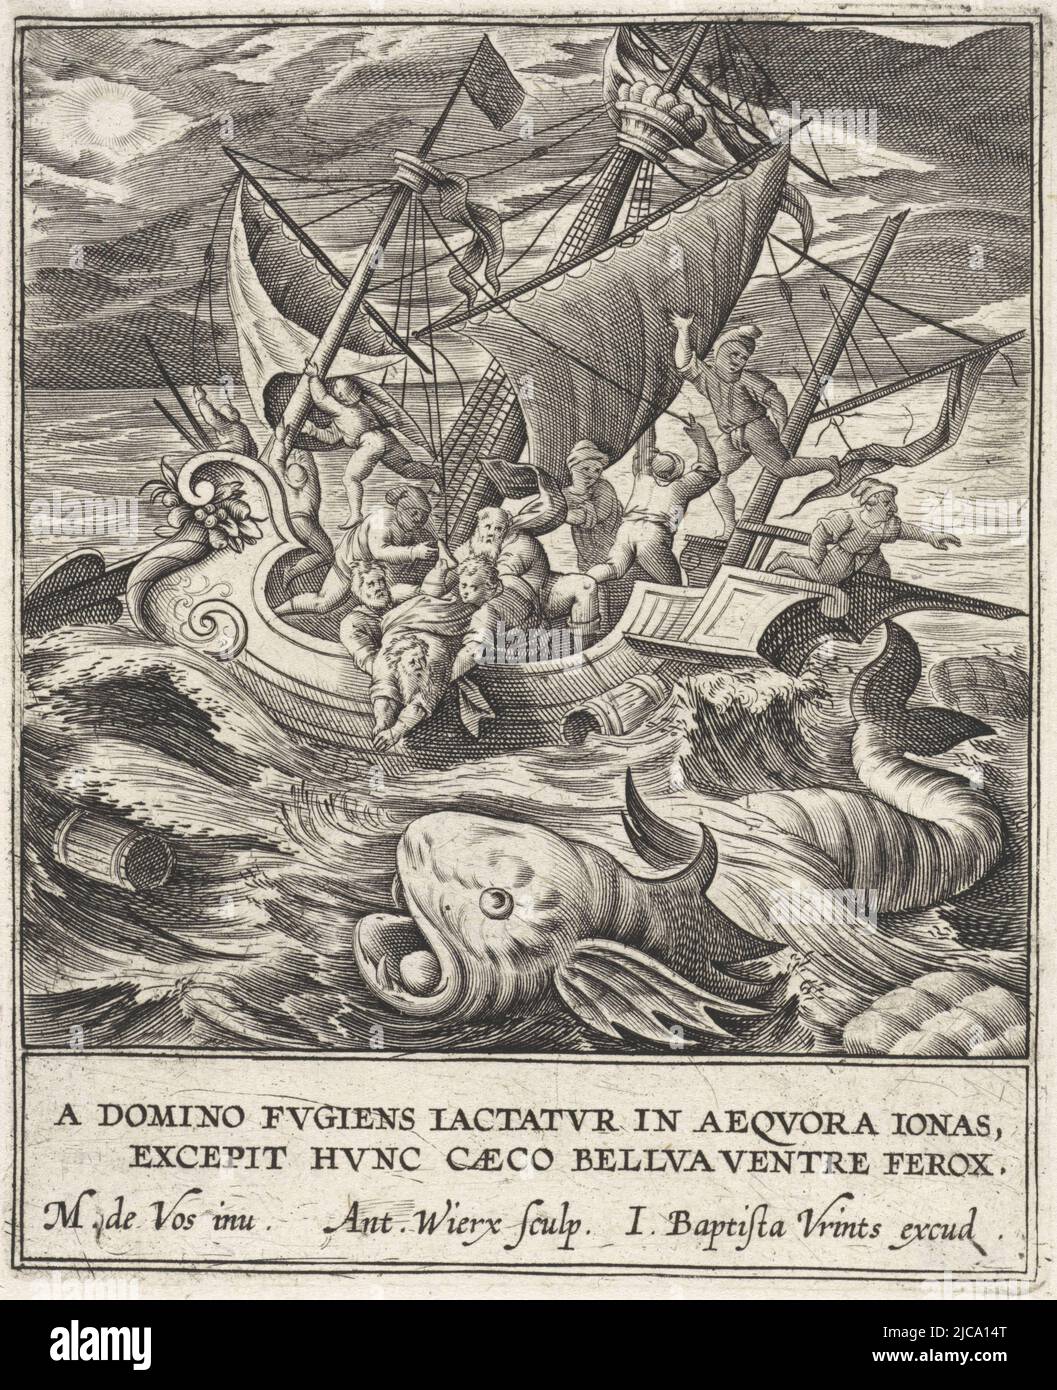 The ship on which Jonah is sailing is ravaged by a severe storm Jonah asks the sailors to throw him overboard to appease God's anger A large fish swims in front of the ship In the margin a two-line caption in Latin, Jonah is thrown overboard by the sailors History of Jonah , print maker: Antonie Wierix (II), (mentioned on object), Maerten de Vos, (mentioned on object), publisher: Johannes Baptista Vrints (I), (mentioned on object), Antwerp, 1579 - before 1611, paper, engraving, h 110 mm × w 90 mm Stock Photo